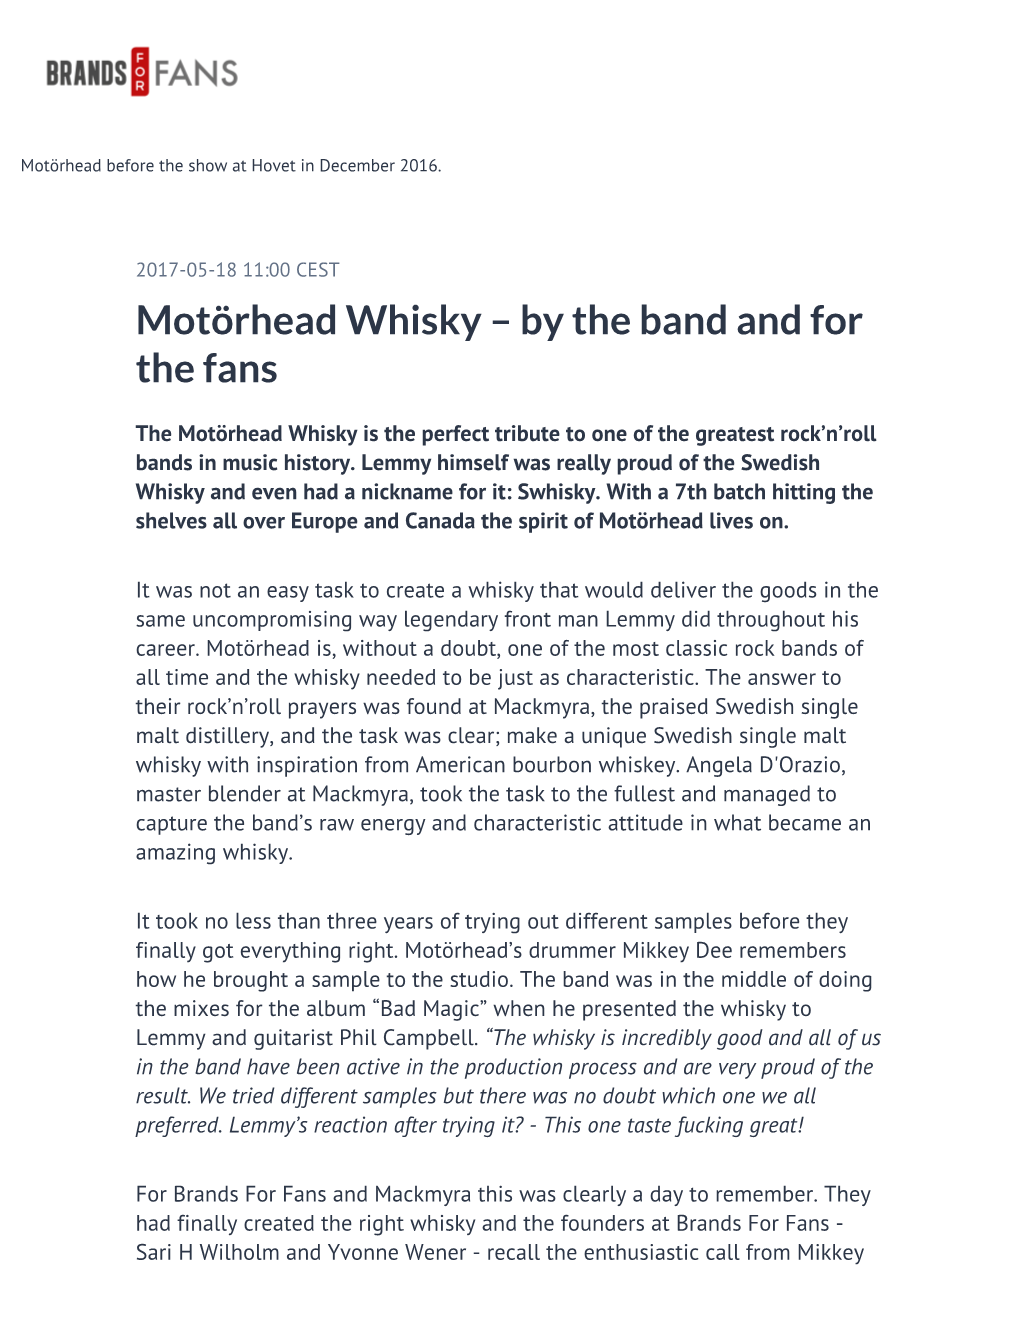 Motörhead Whisky – by the Band and for the Fans